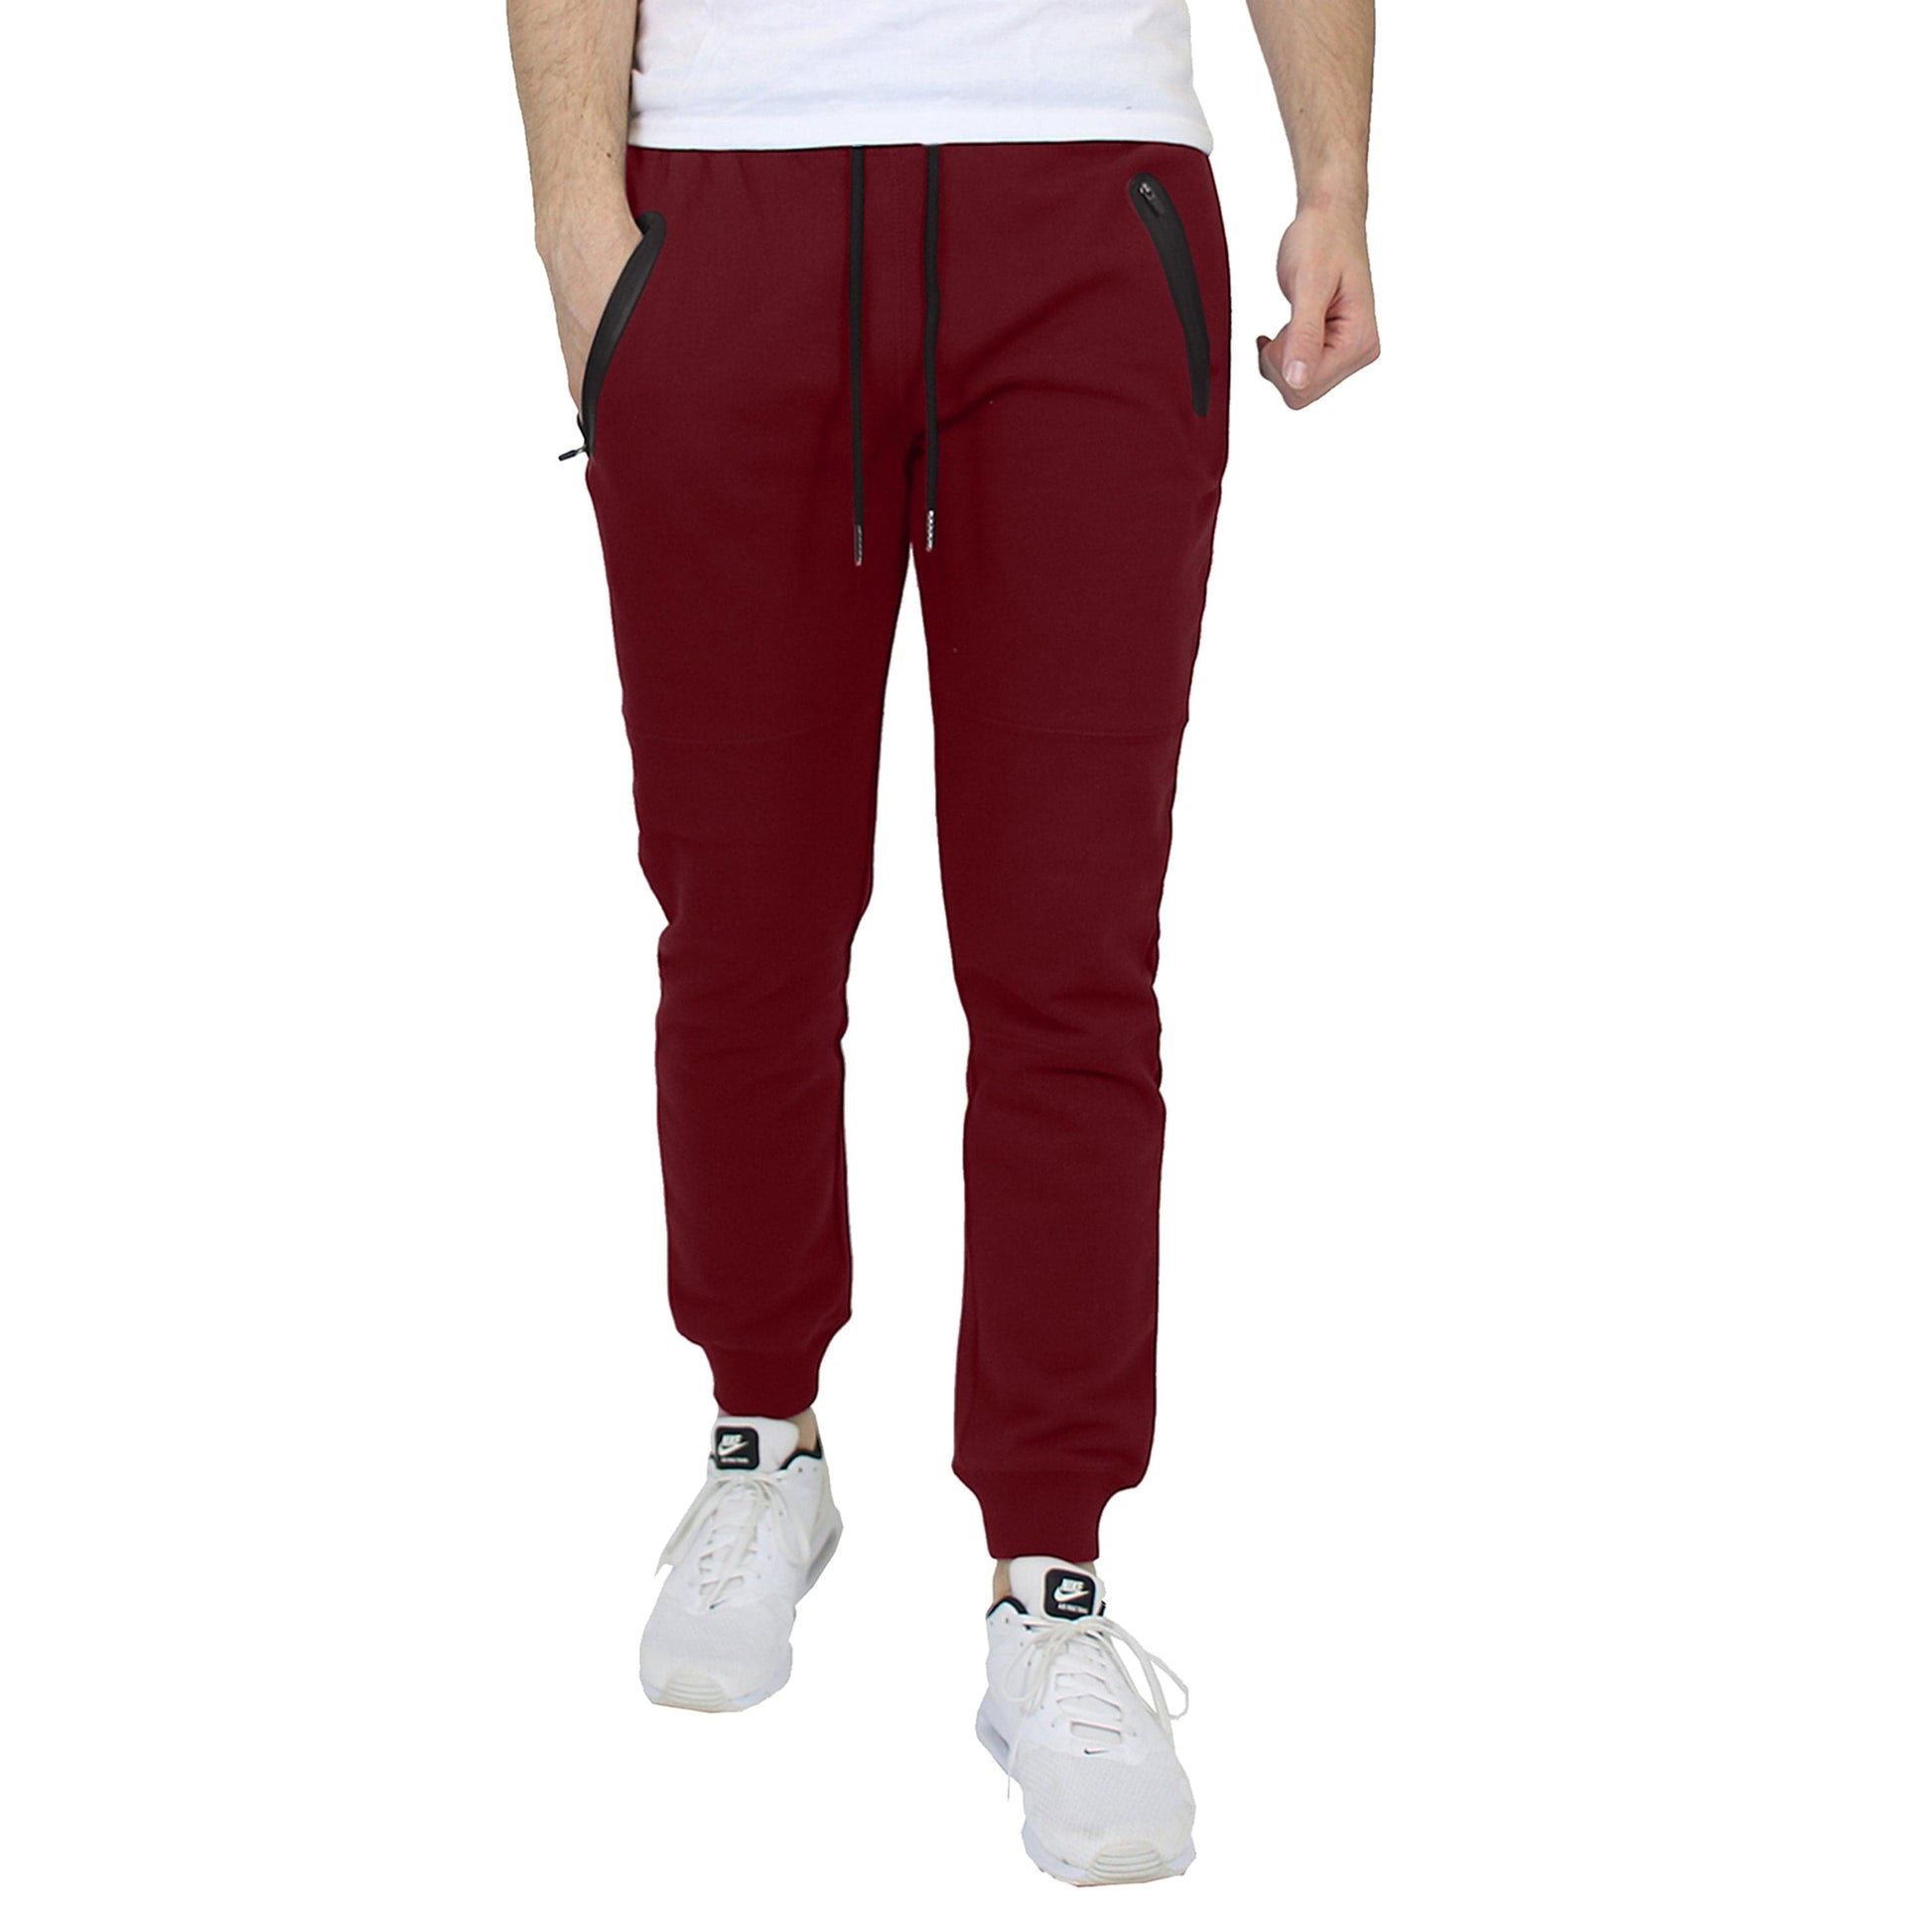 Men's Slim Fit Jogger with Heat Seal Zippers